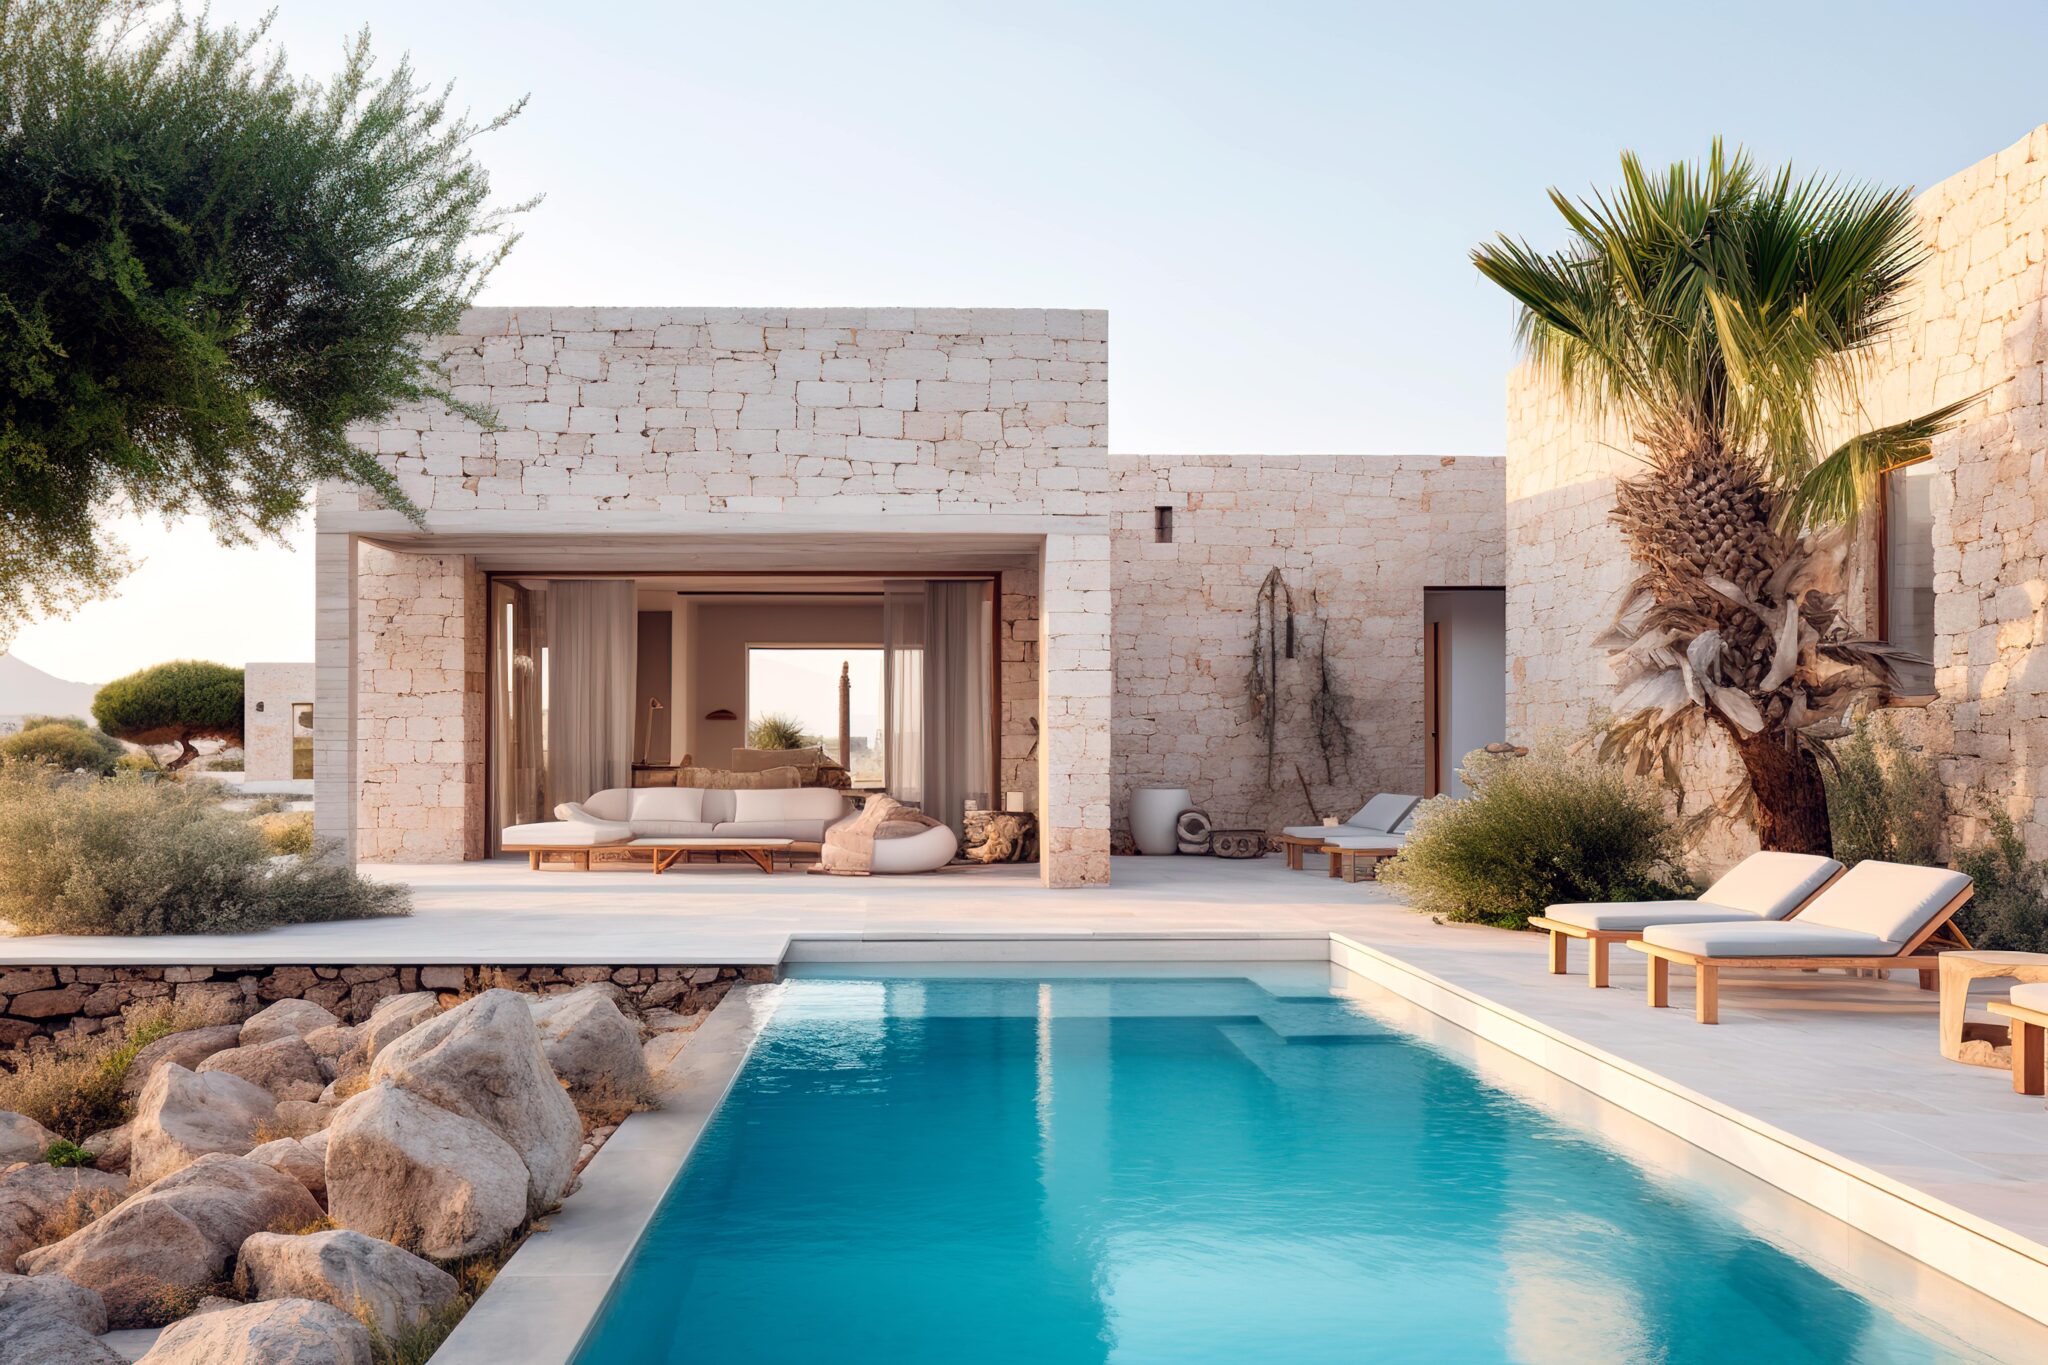 A holiday home with a beautiful pool and outdoor area